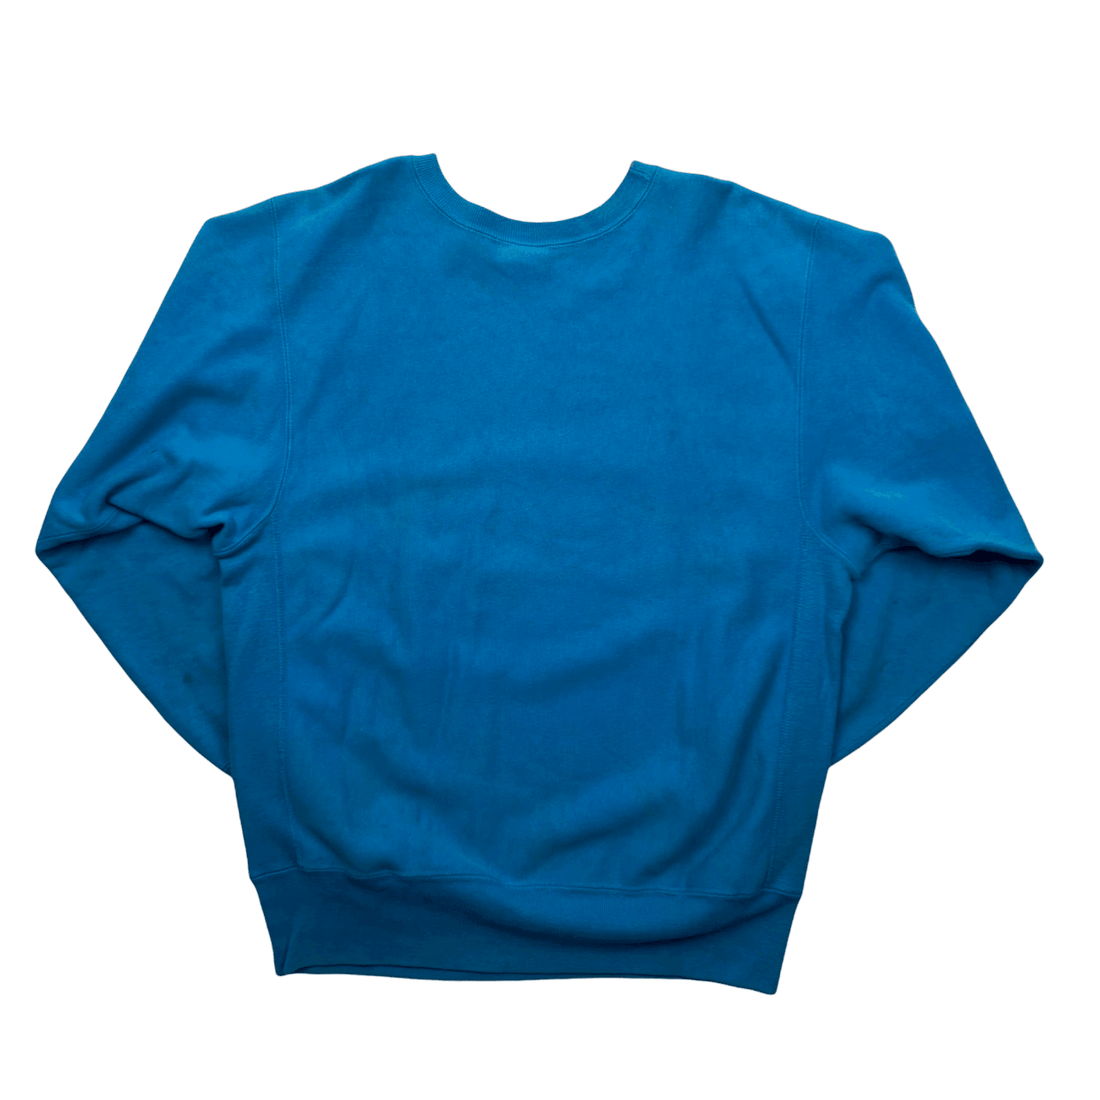 Vintage 90s Blue Champion Reverse Weave Spell-Out Sweatshirt - Extra Large - The Streetwear Studio